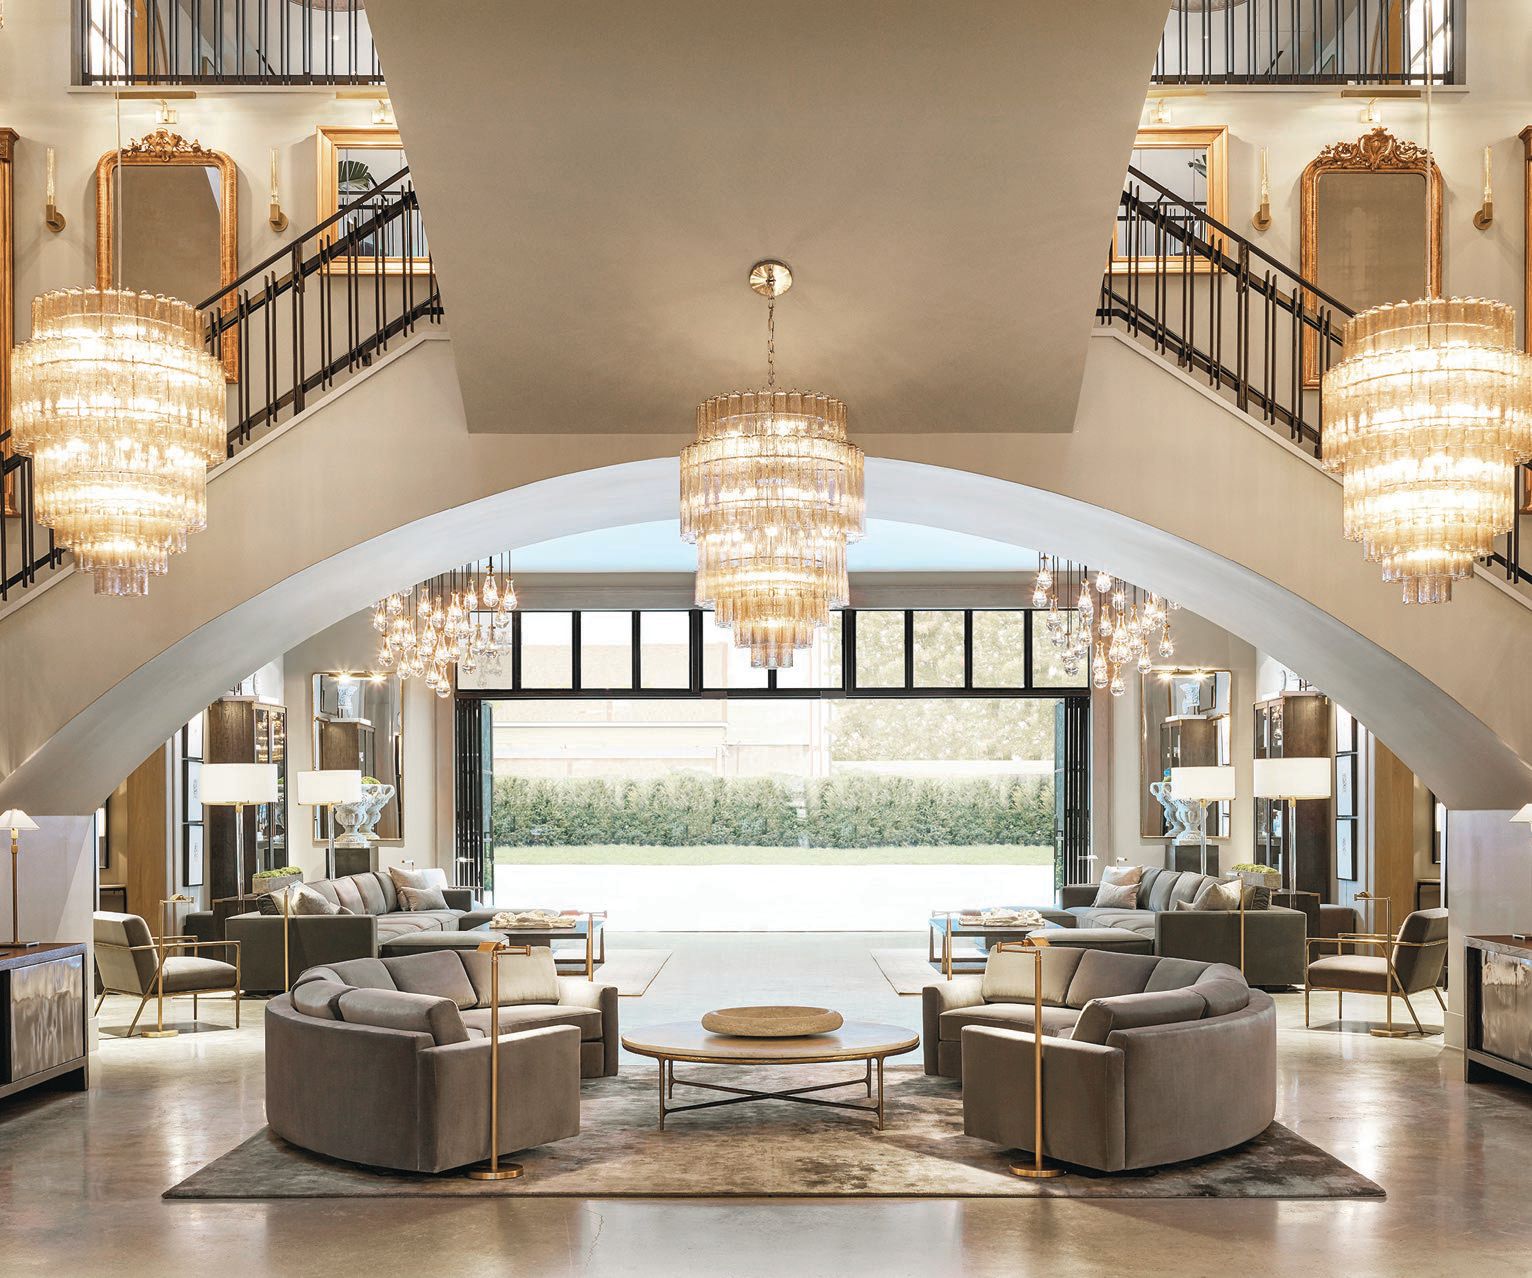 The great room features a grand staircase, chic chandeliers and a relaxing lounge area. PHOTO COURTESY OF RH OAK BROOK